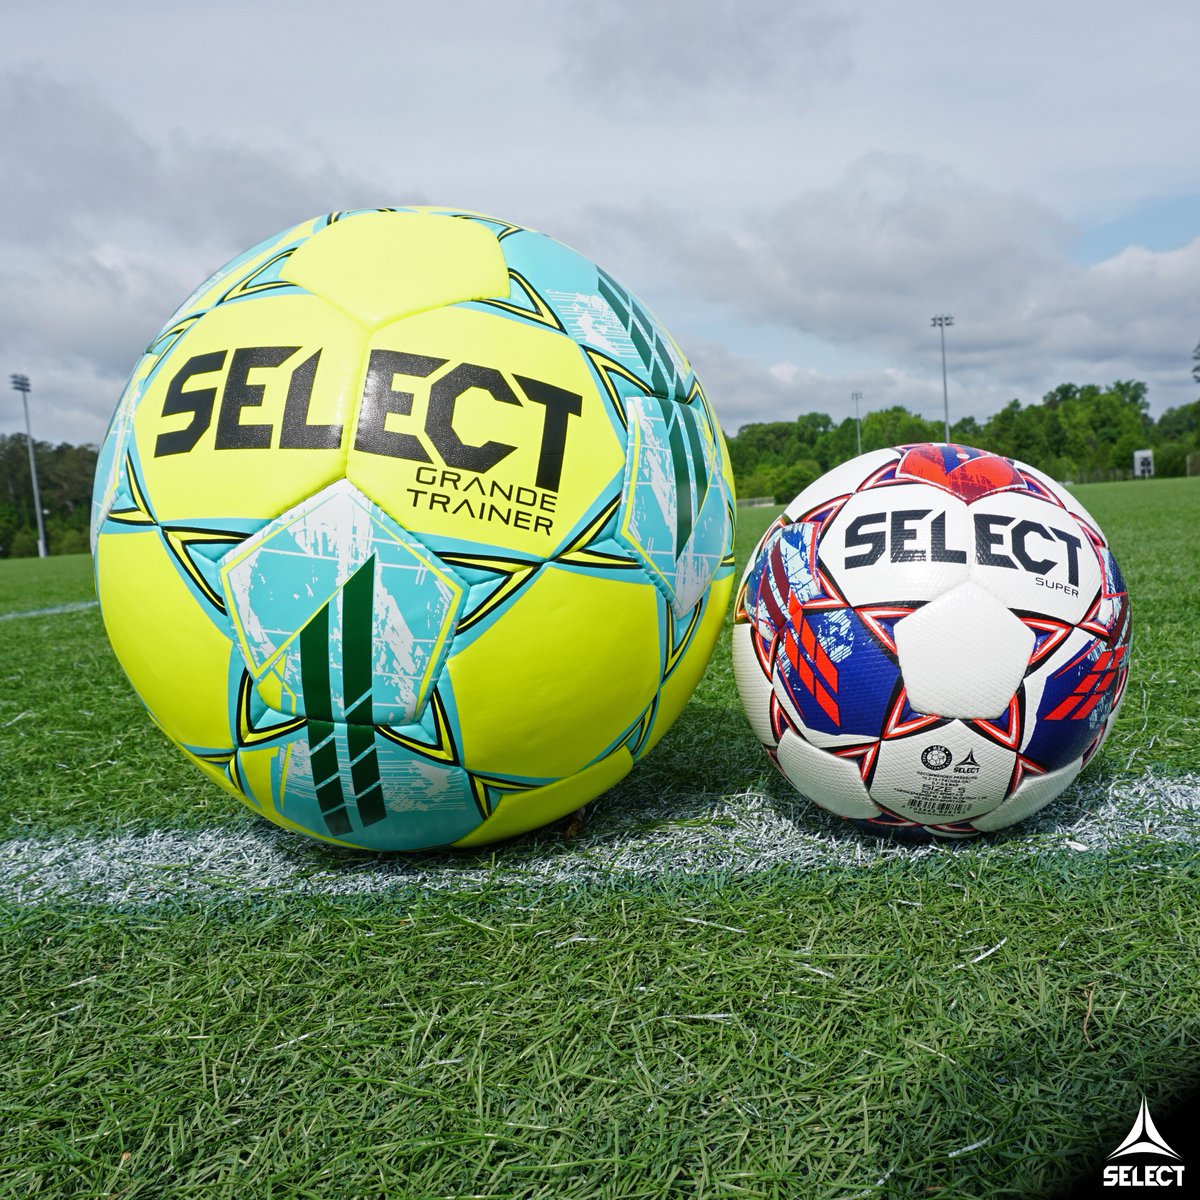 The fan favorite, 𝙂𝙍𝘼𝙉𝘿𝙀 𝙏𝙍𝘼𝙄𝙉𝙀𝙍, is back and now available‼️ We took some comparison photos showing what it looks like next to a mini ball, a futsal ball, and a regulation size 5 ball